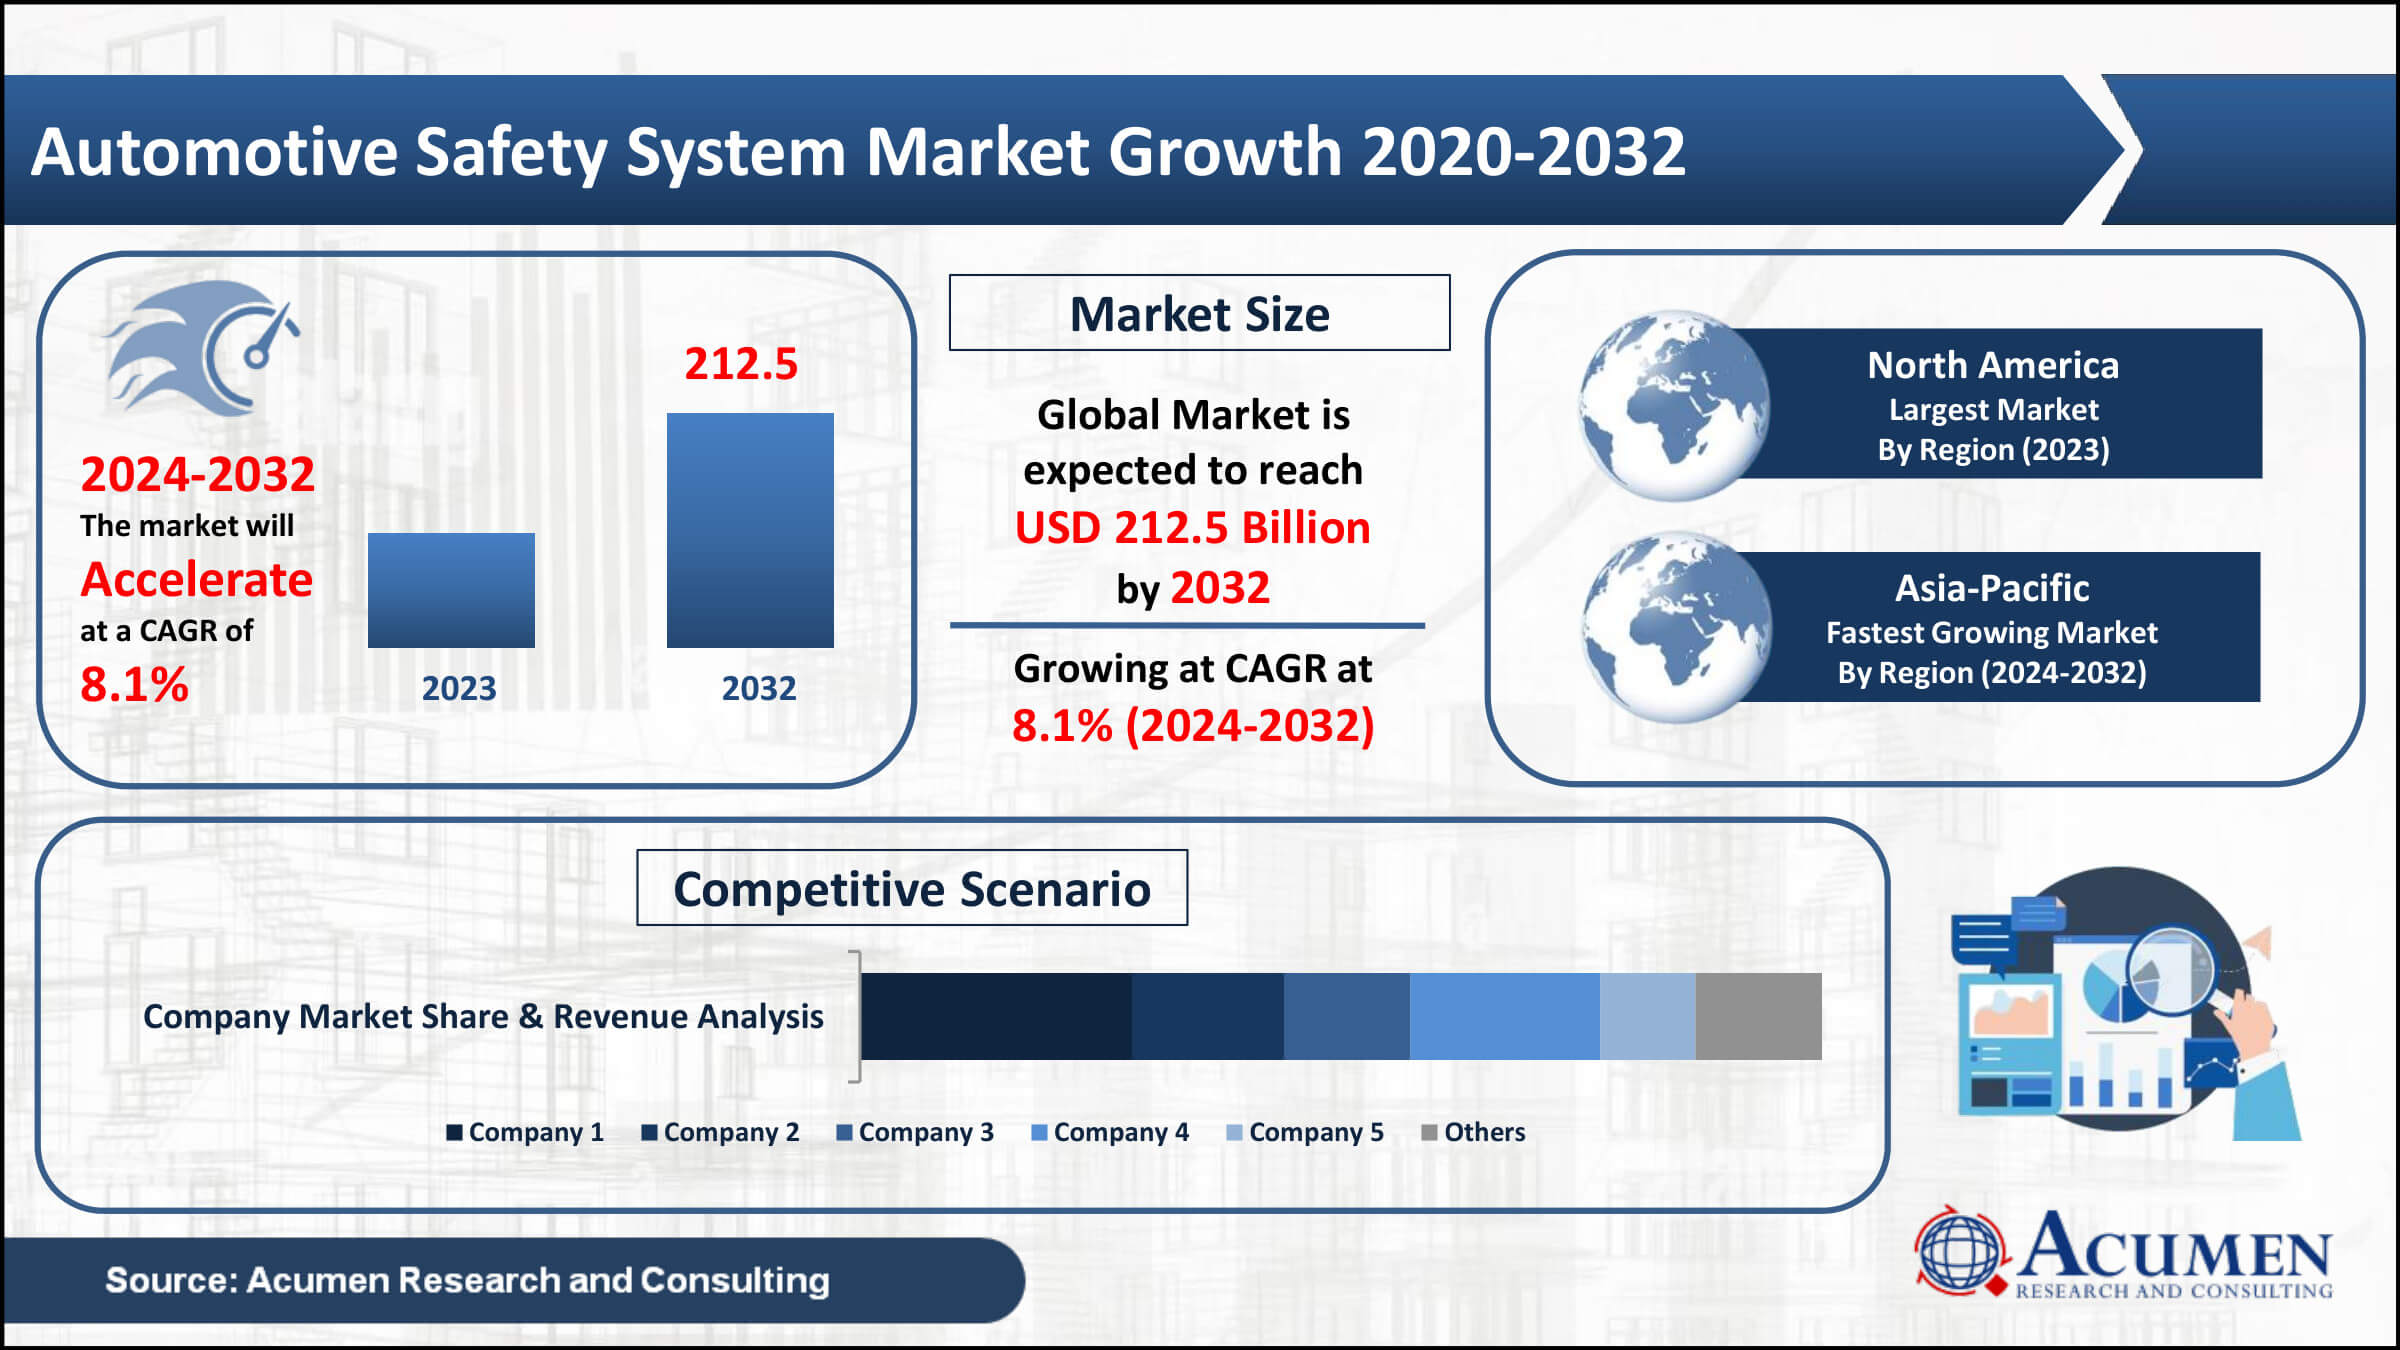 Automotive Safety System Industry Forecast Period